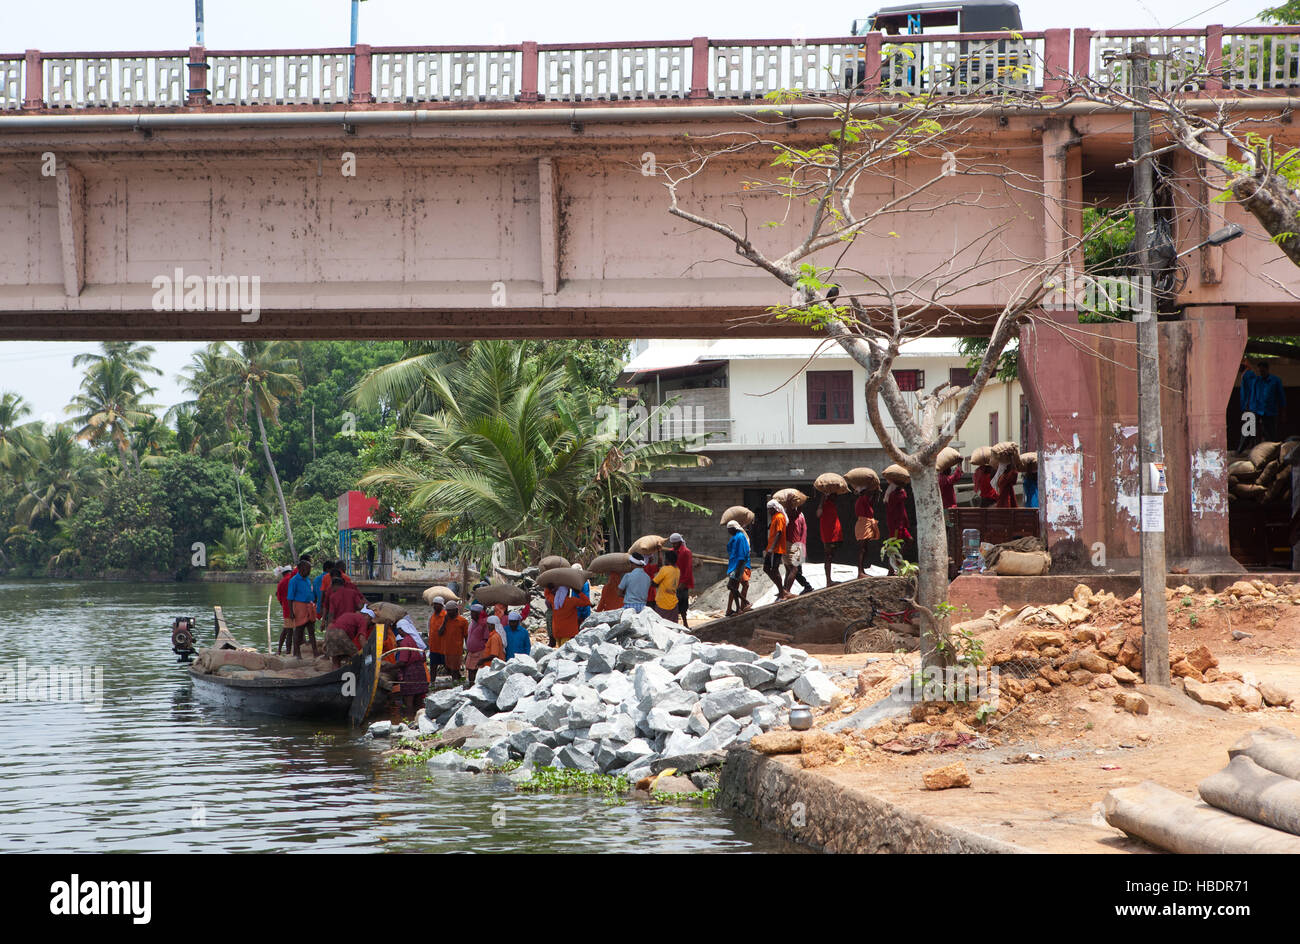 Workers unloading rice barge under a bridge  in Alappuzha (Alleppey), Kerala, India, Stock Photo